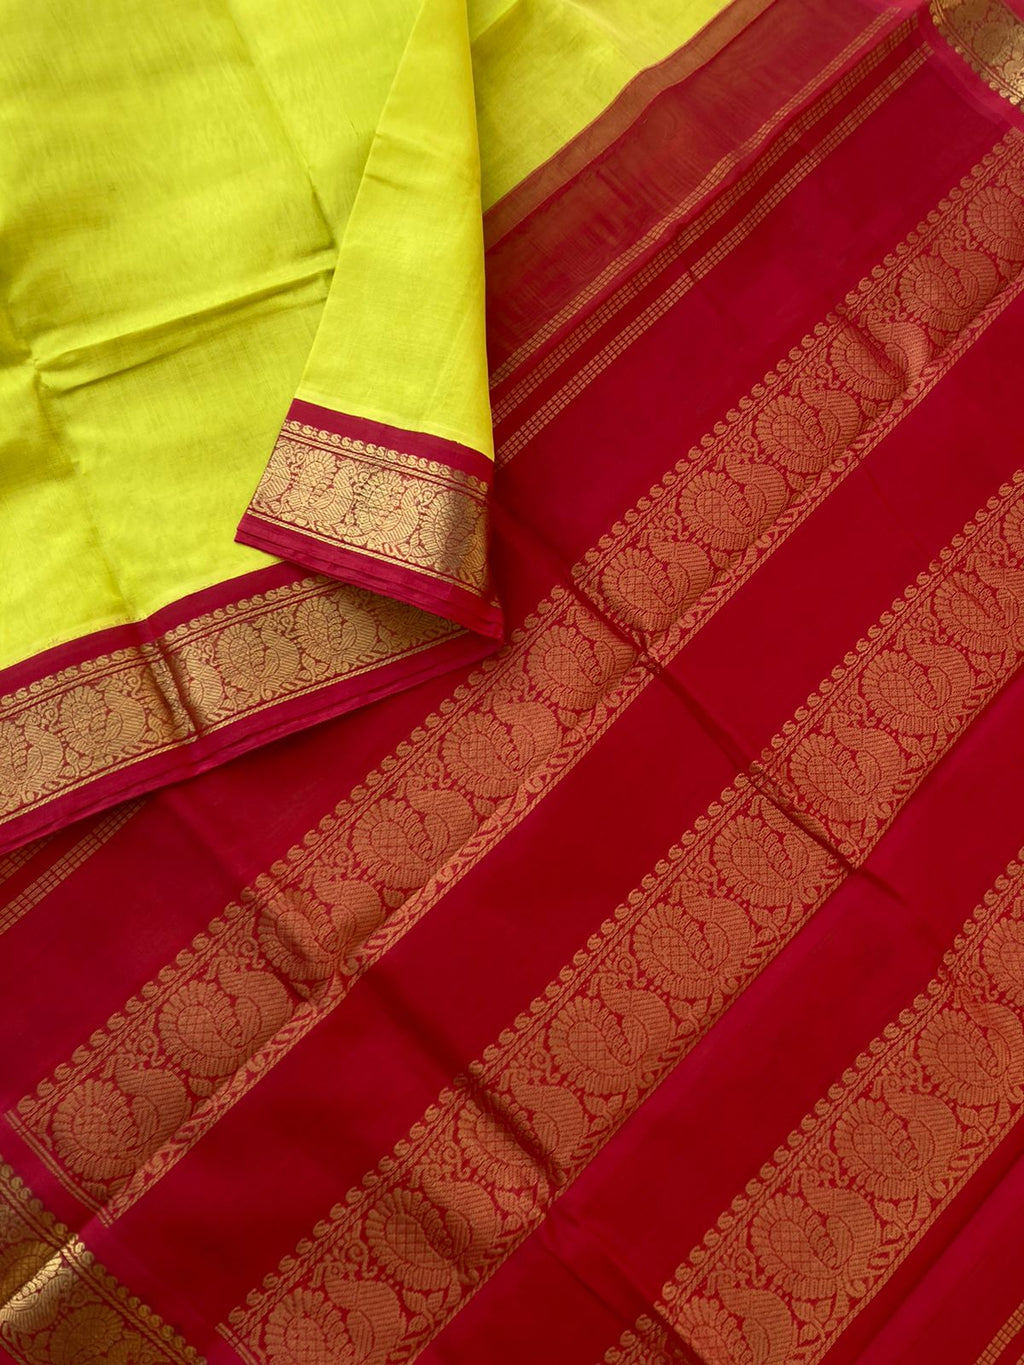 Korvai Silk Cottons - electric yellow and deep red